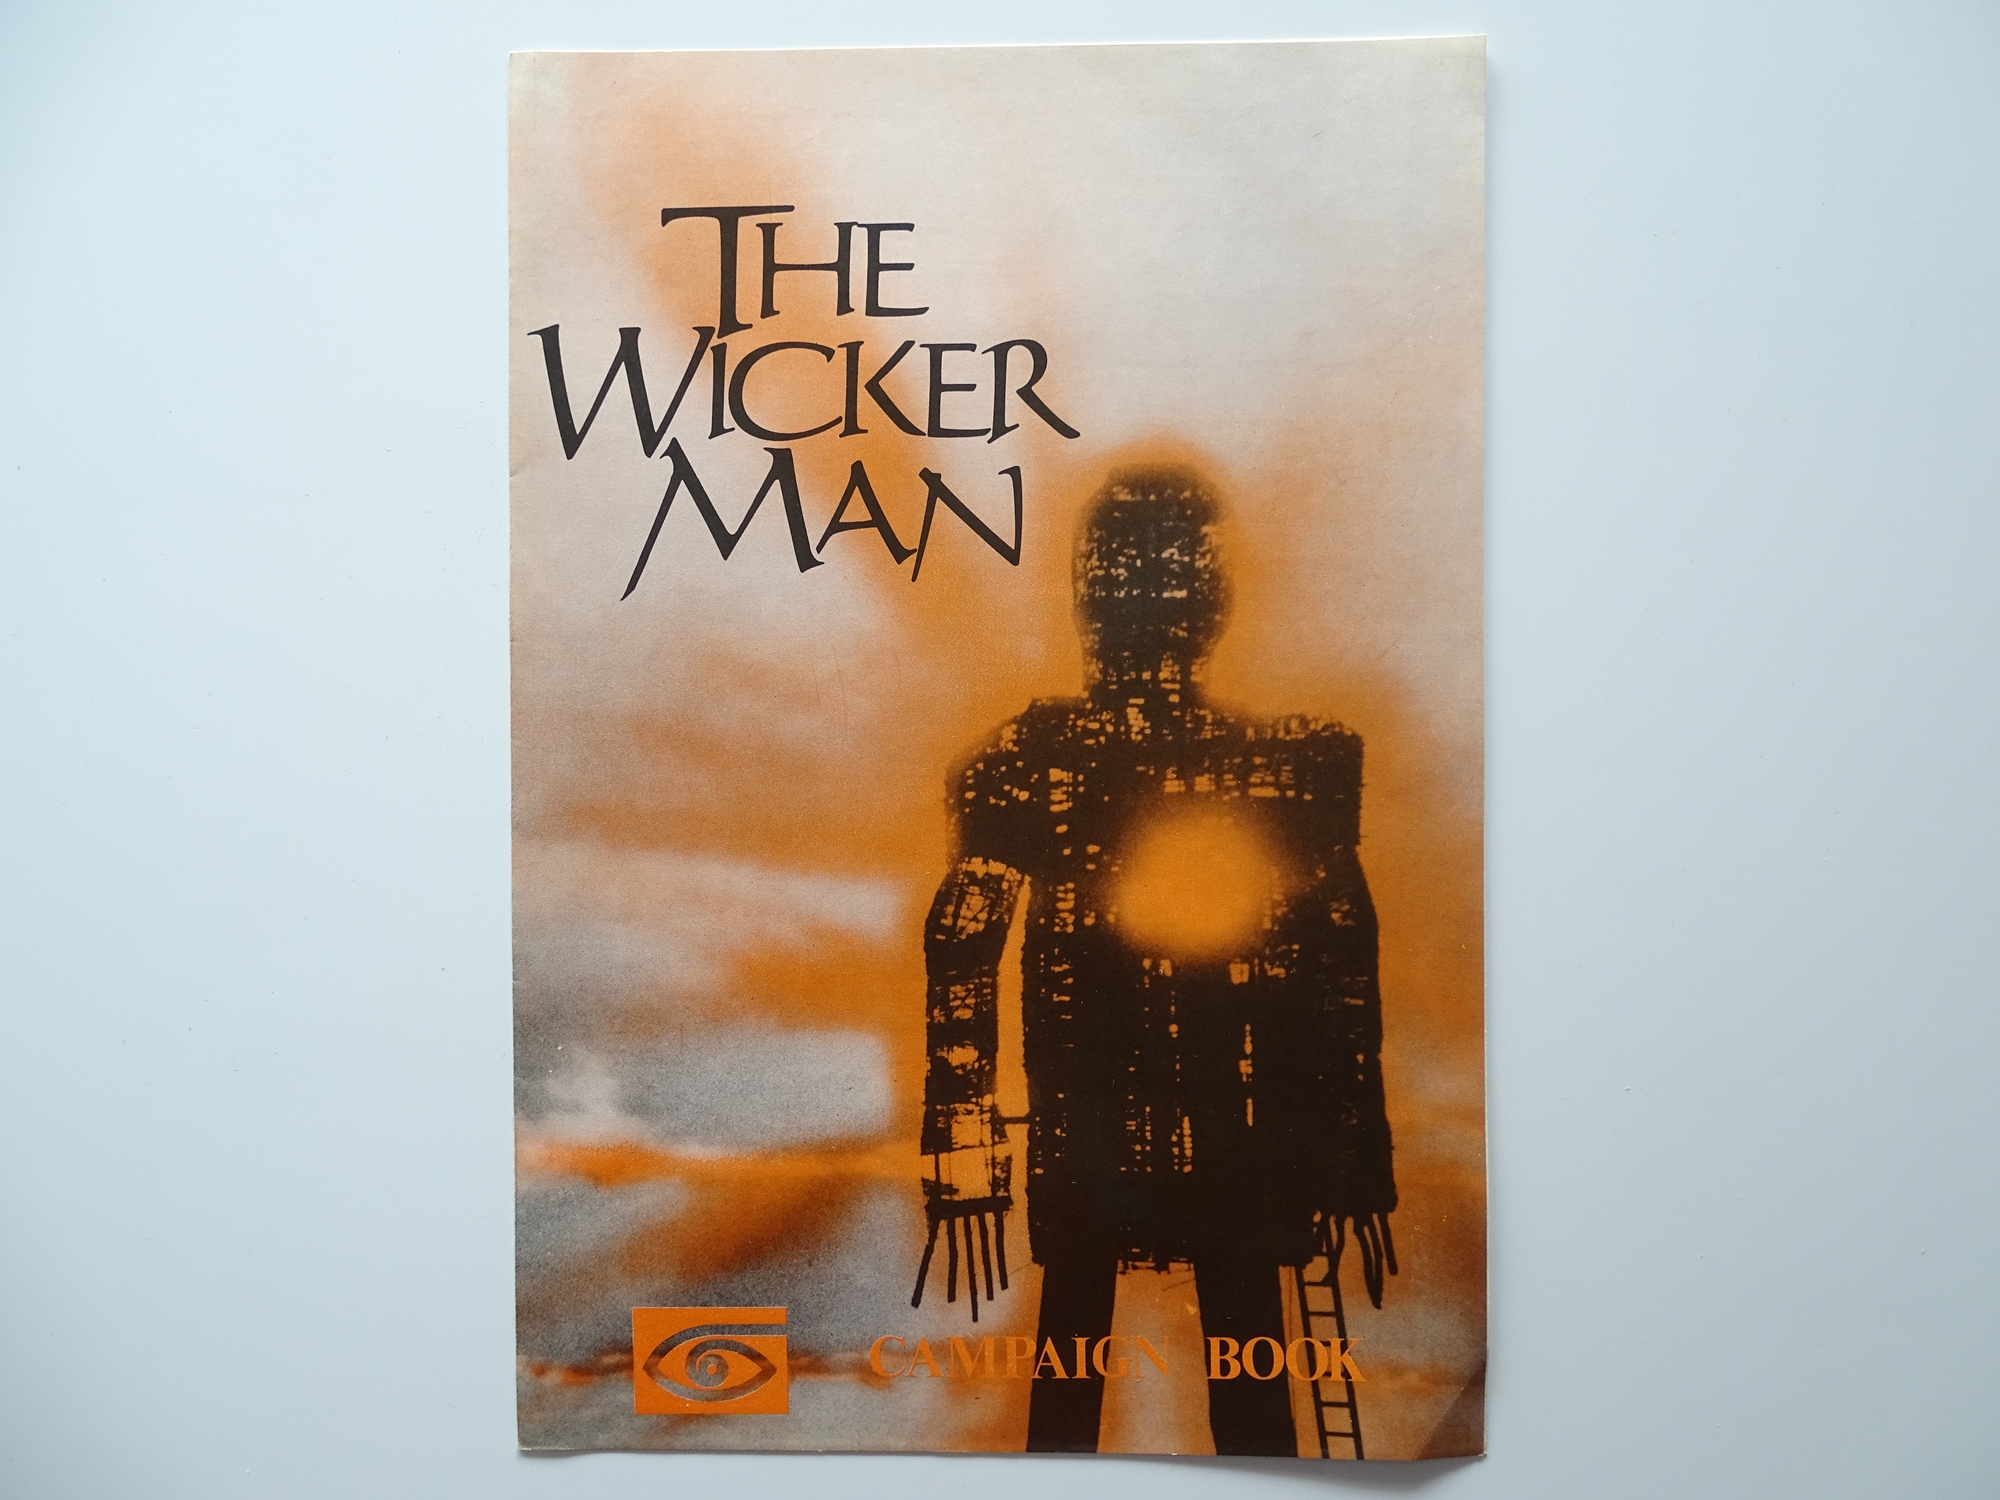 THE WICKER MAN (1973) - BRITISH PRESS CAMPAIGN BROCHURE - Flat/Unfolded (as issued) Fine